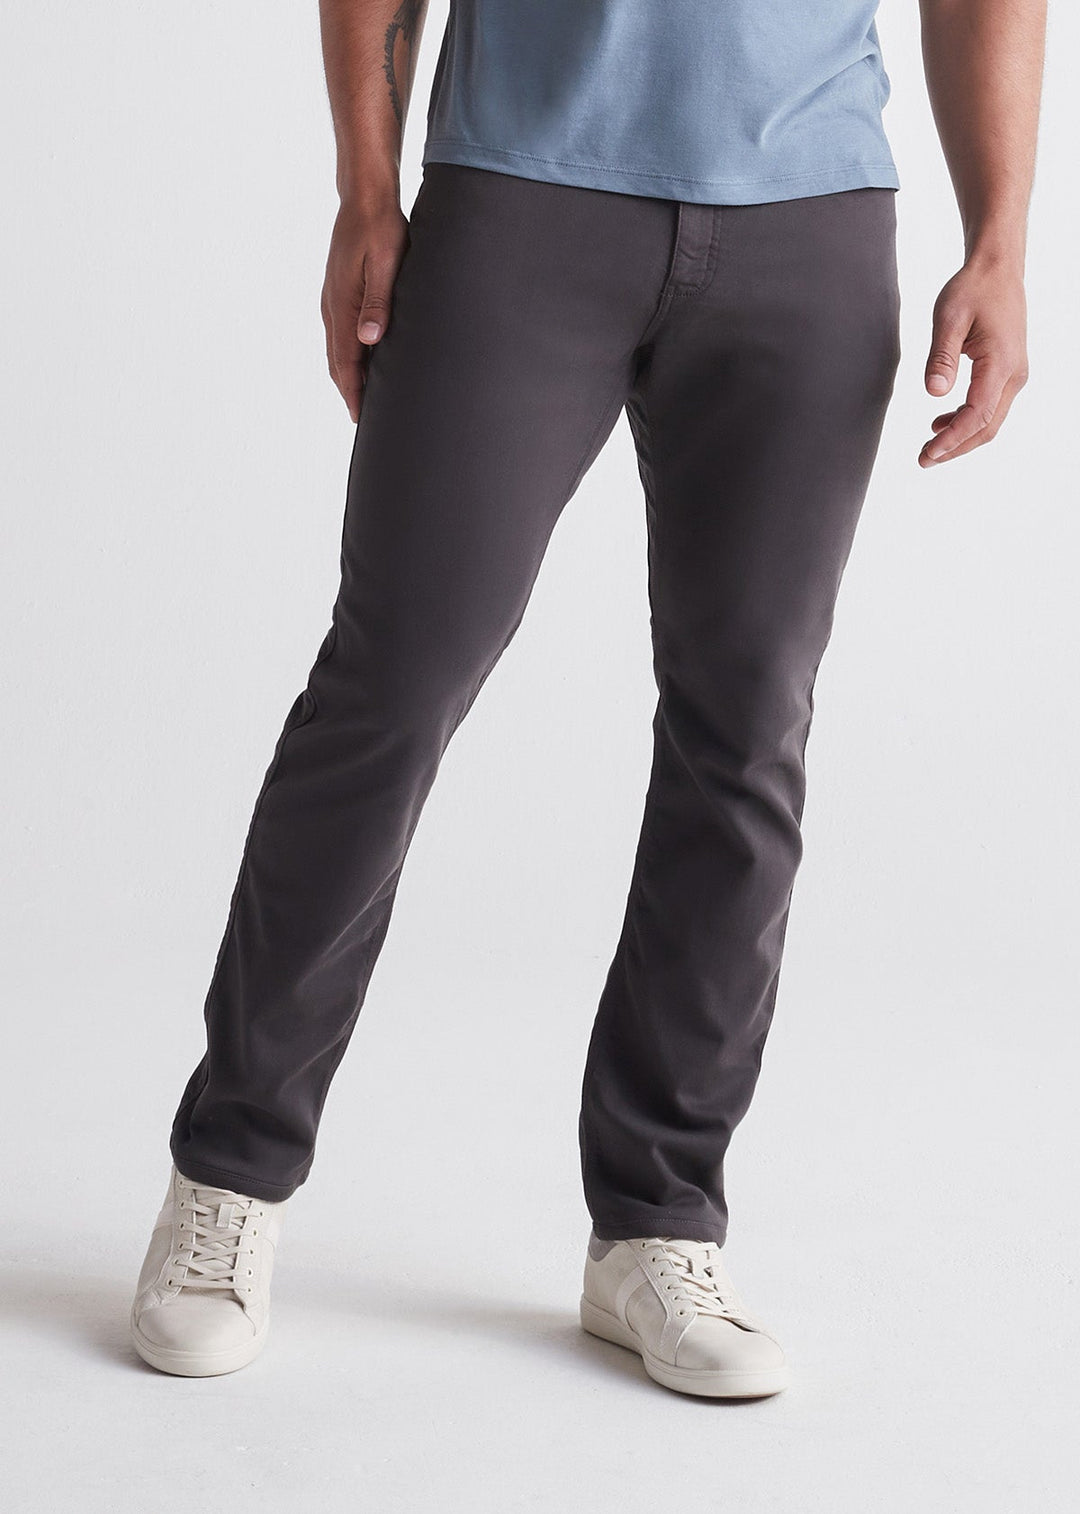 No Sweat Pant Relaxed Taper - Multiple Colors